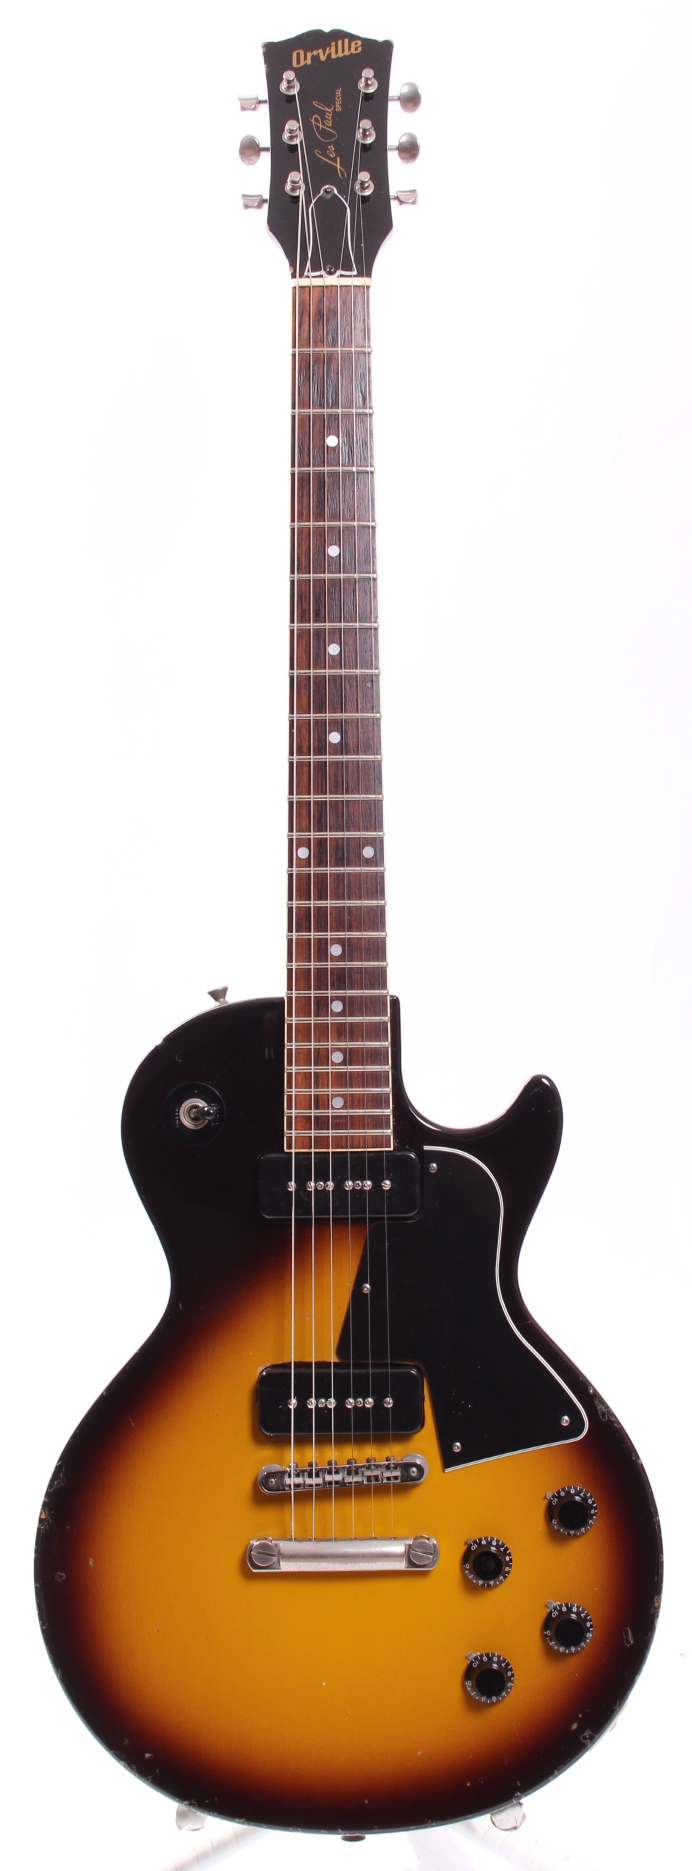 Orville By Gibson Les Paul Special 1993 Sunburst Guitar For Sale